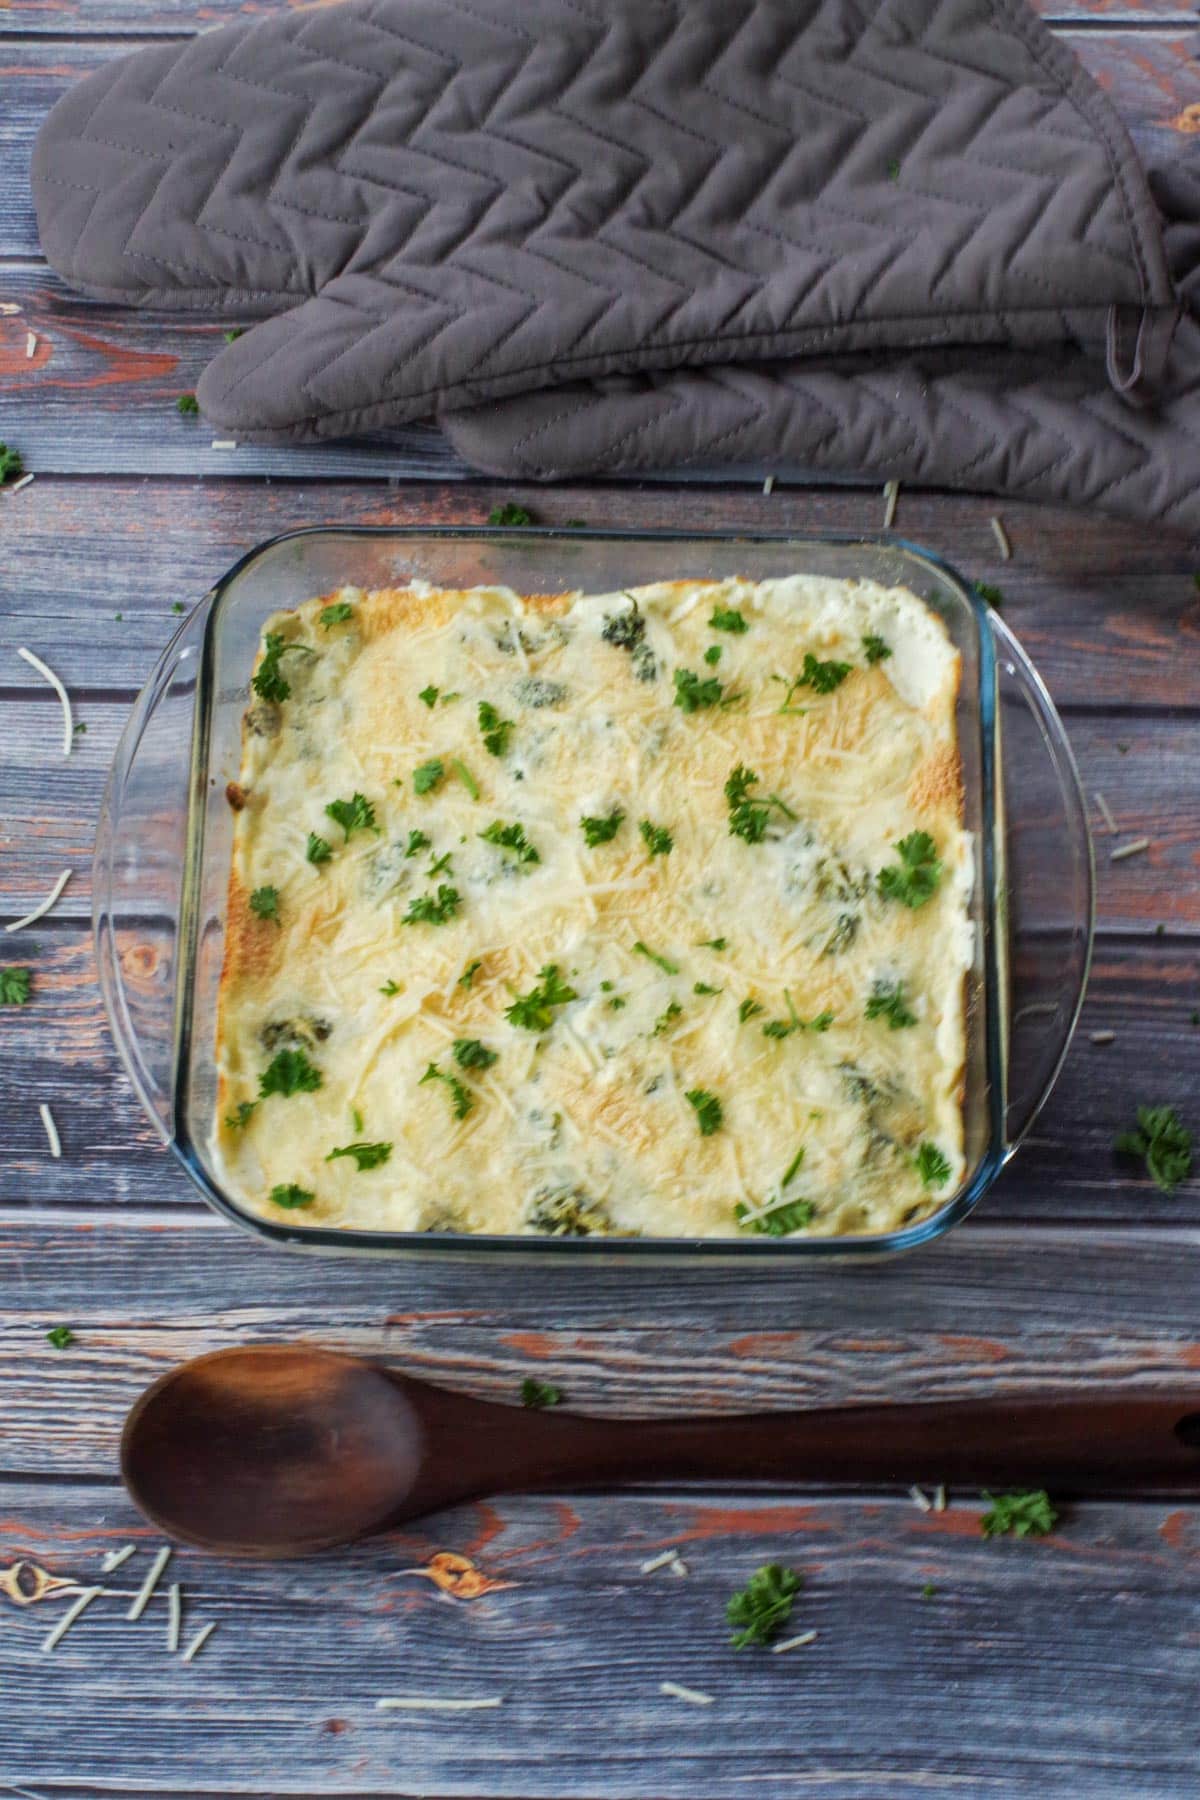 spinach artichoke casserole with wooden spoon below it and grey oven mitts above casserole